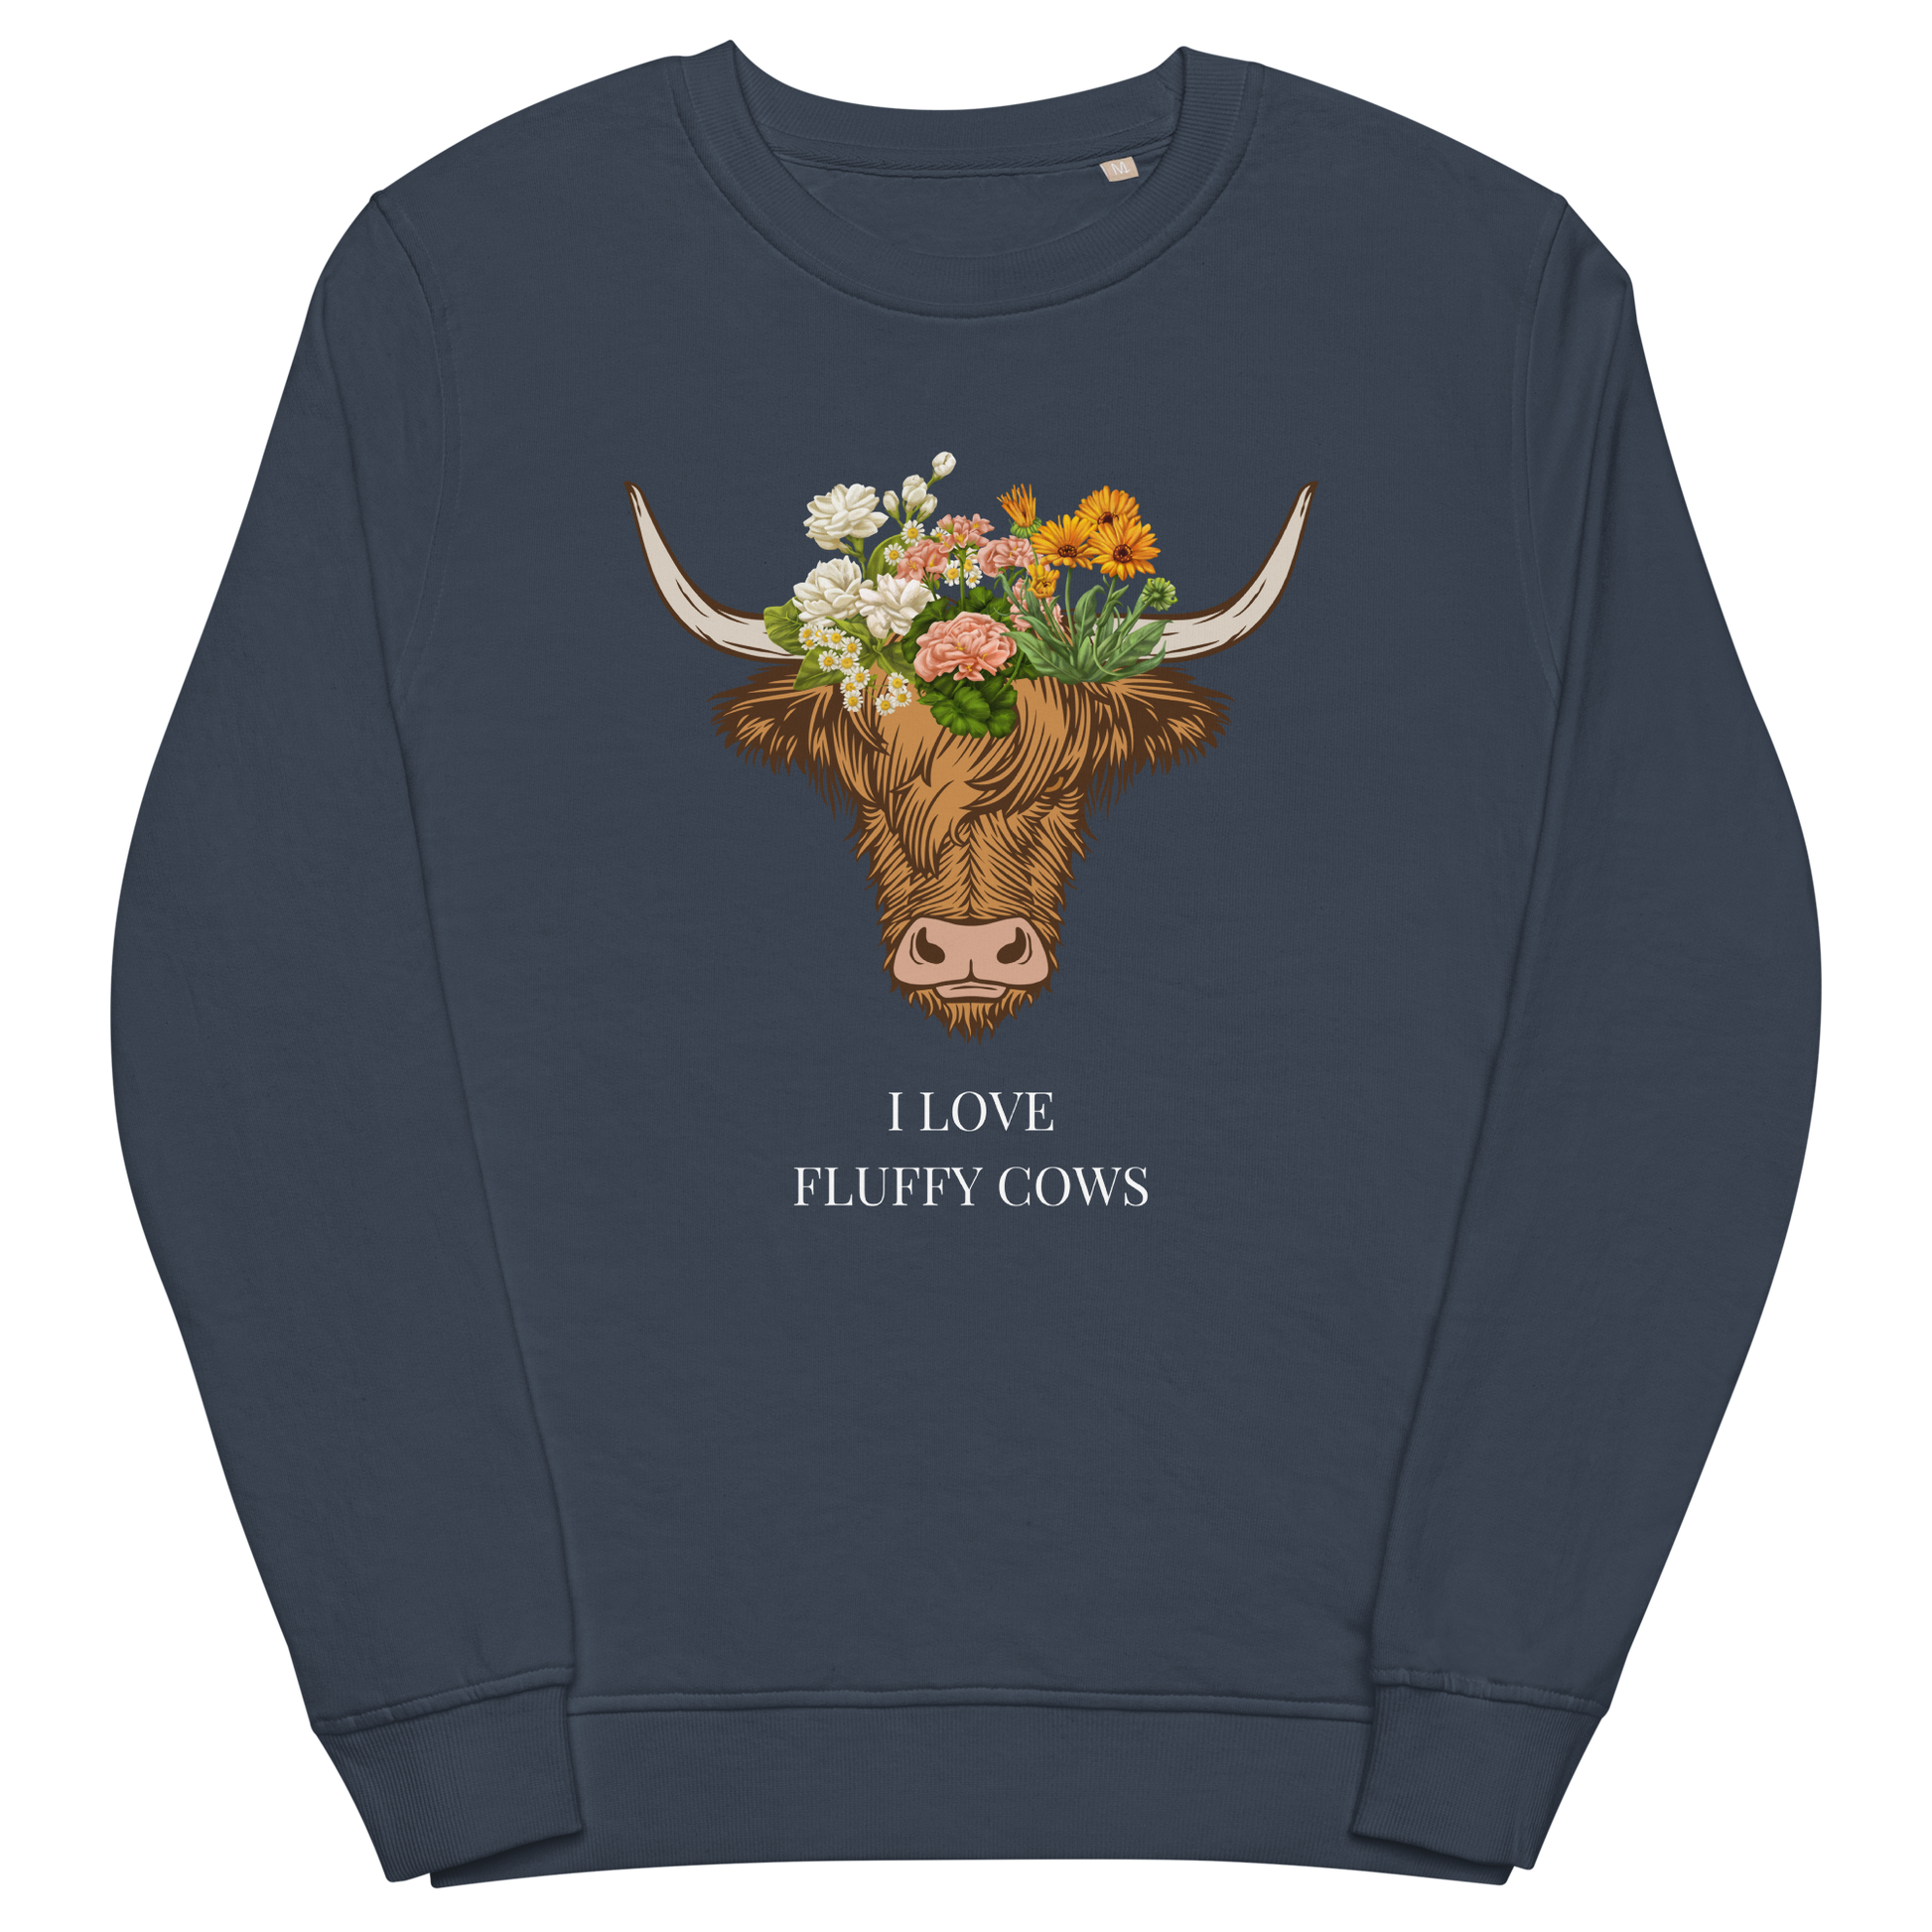 French Navy Organic Cotton Highland Cow Sweatshirt featuring an adorable I Love Fluffy Cows graphic on the chest - Cute Graphic Highland Cow Sweatshirts - Boozy Fox